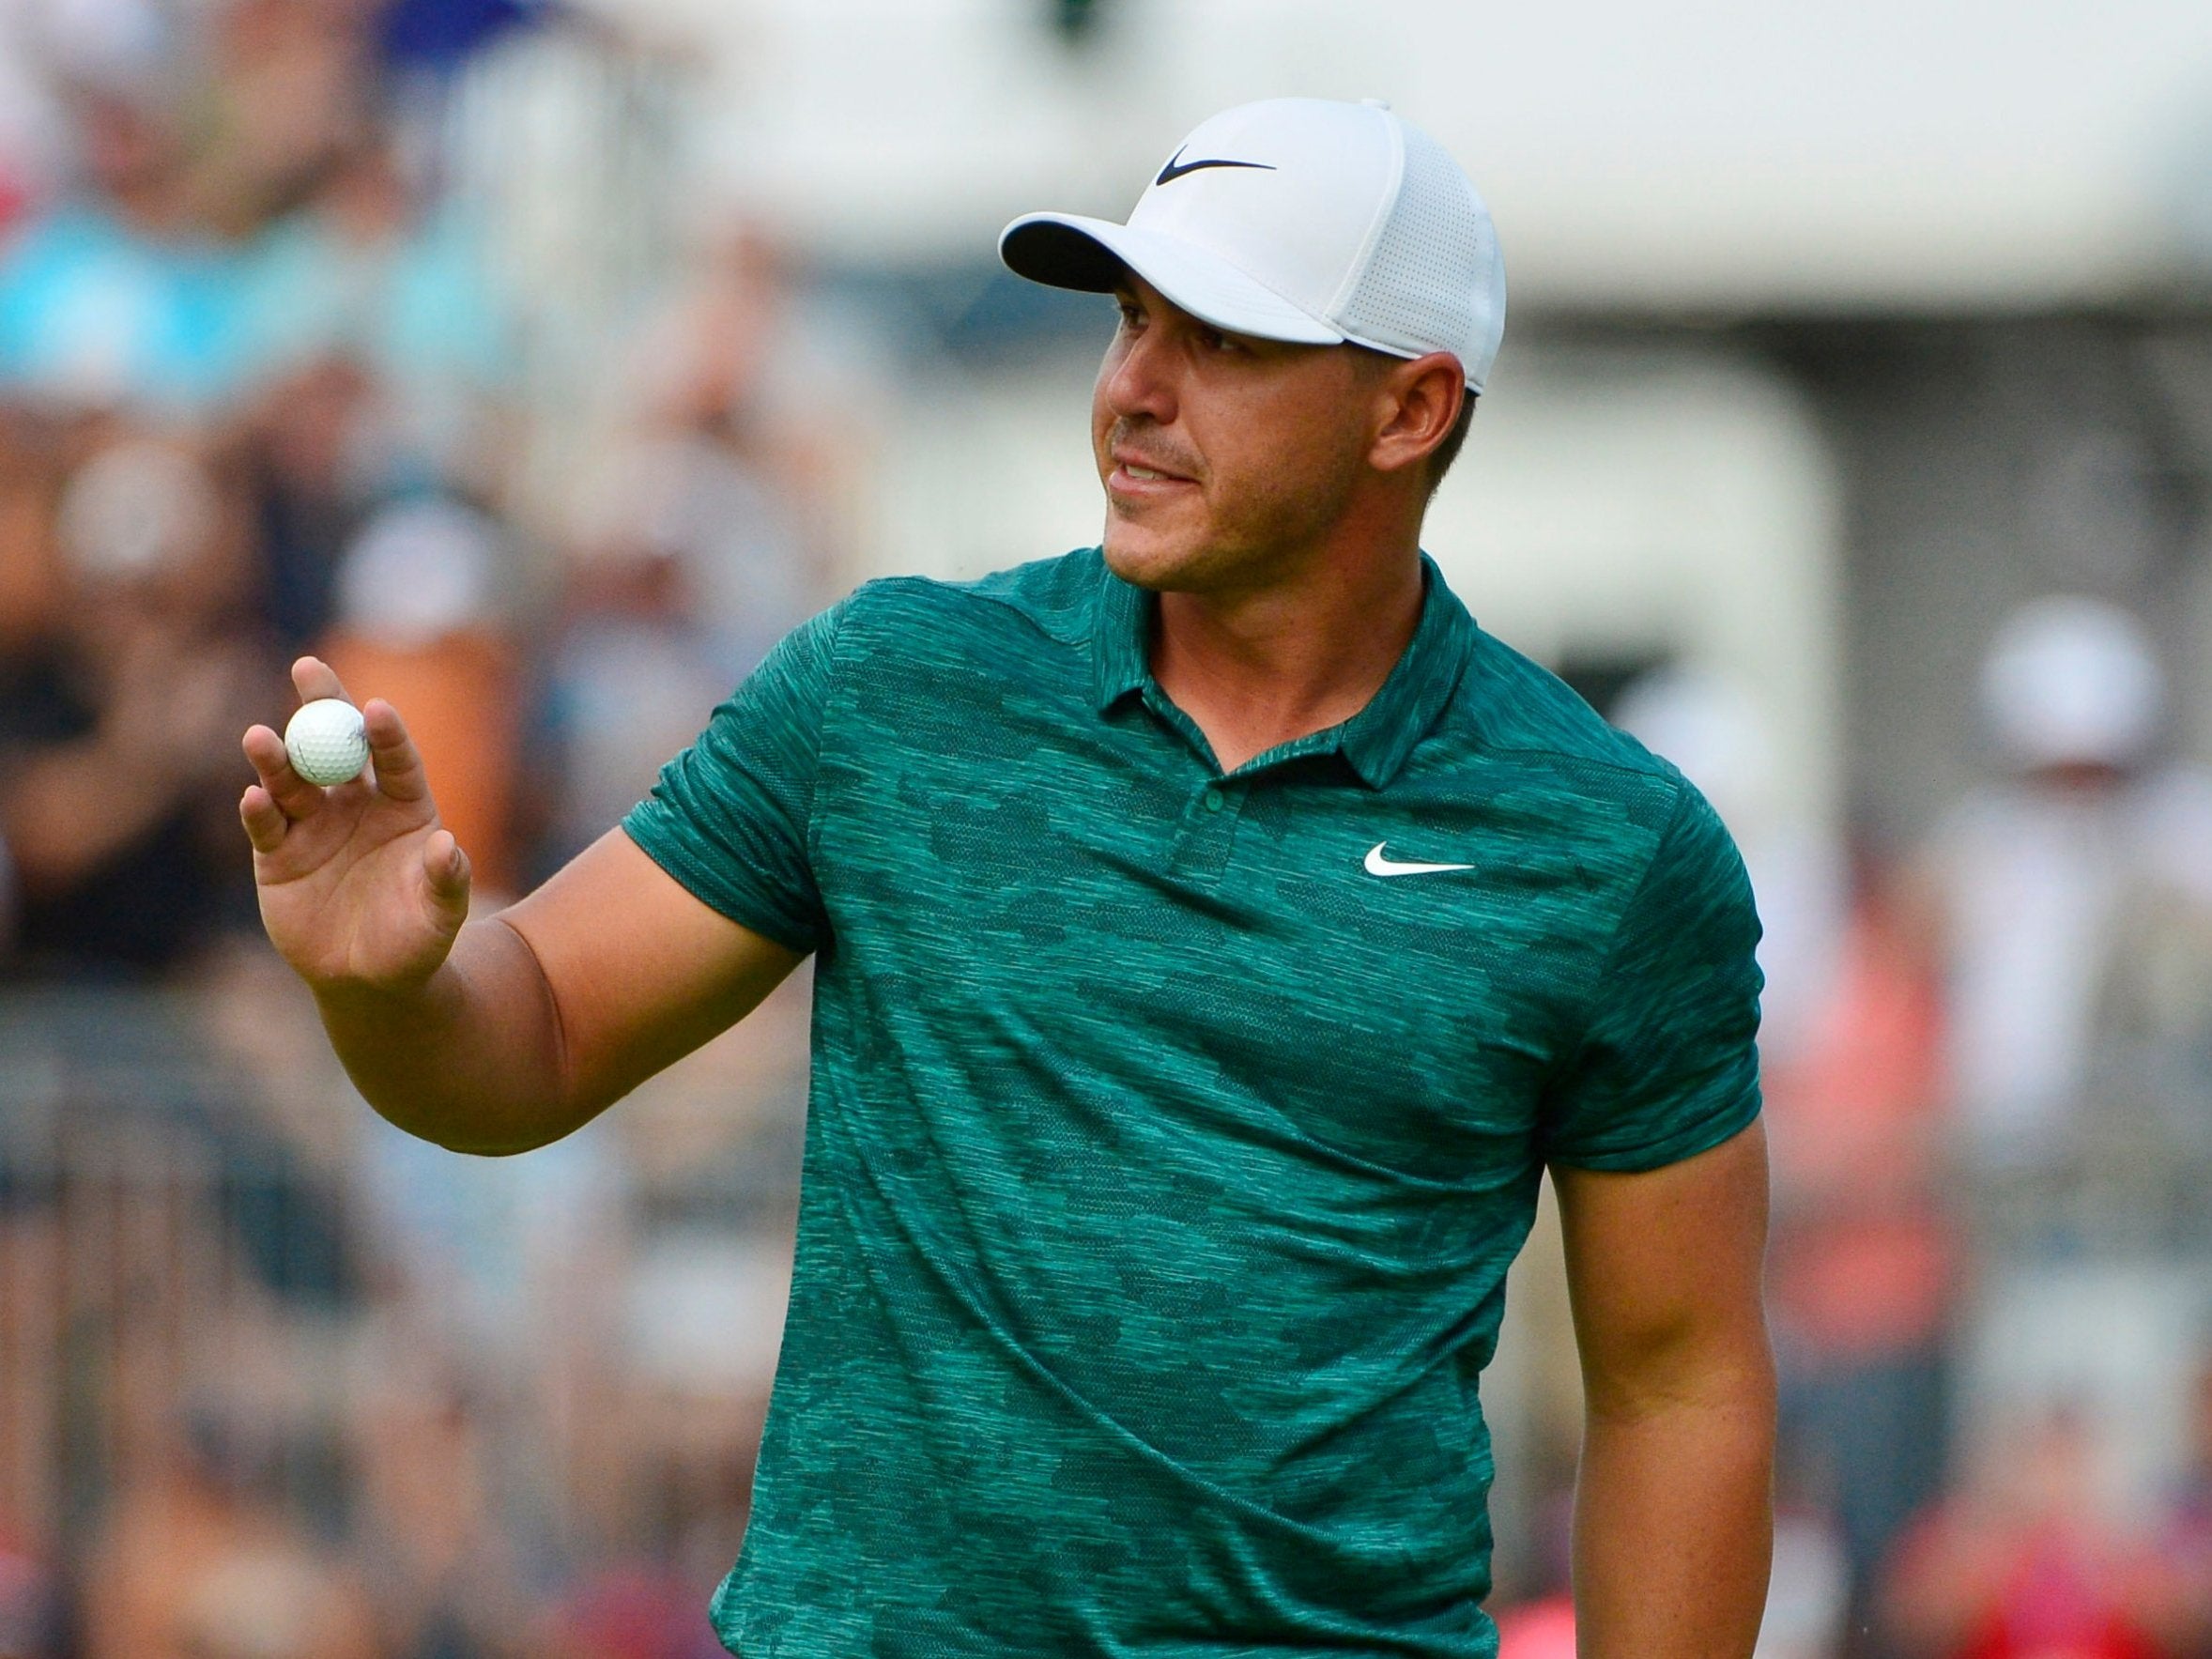 Brooks Koepka finished the PGA Championship on -16, two shots ahead of Tiger Woods